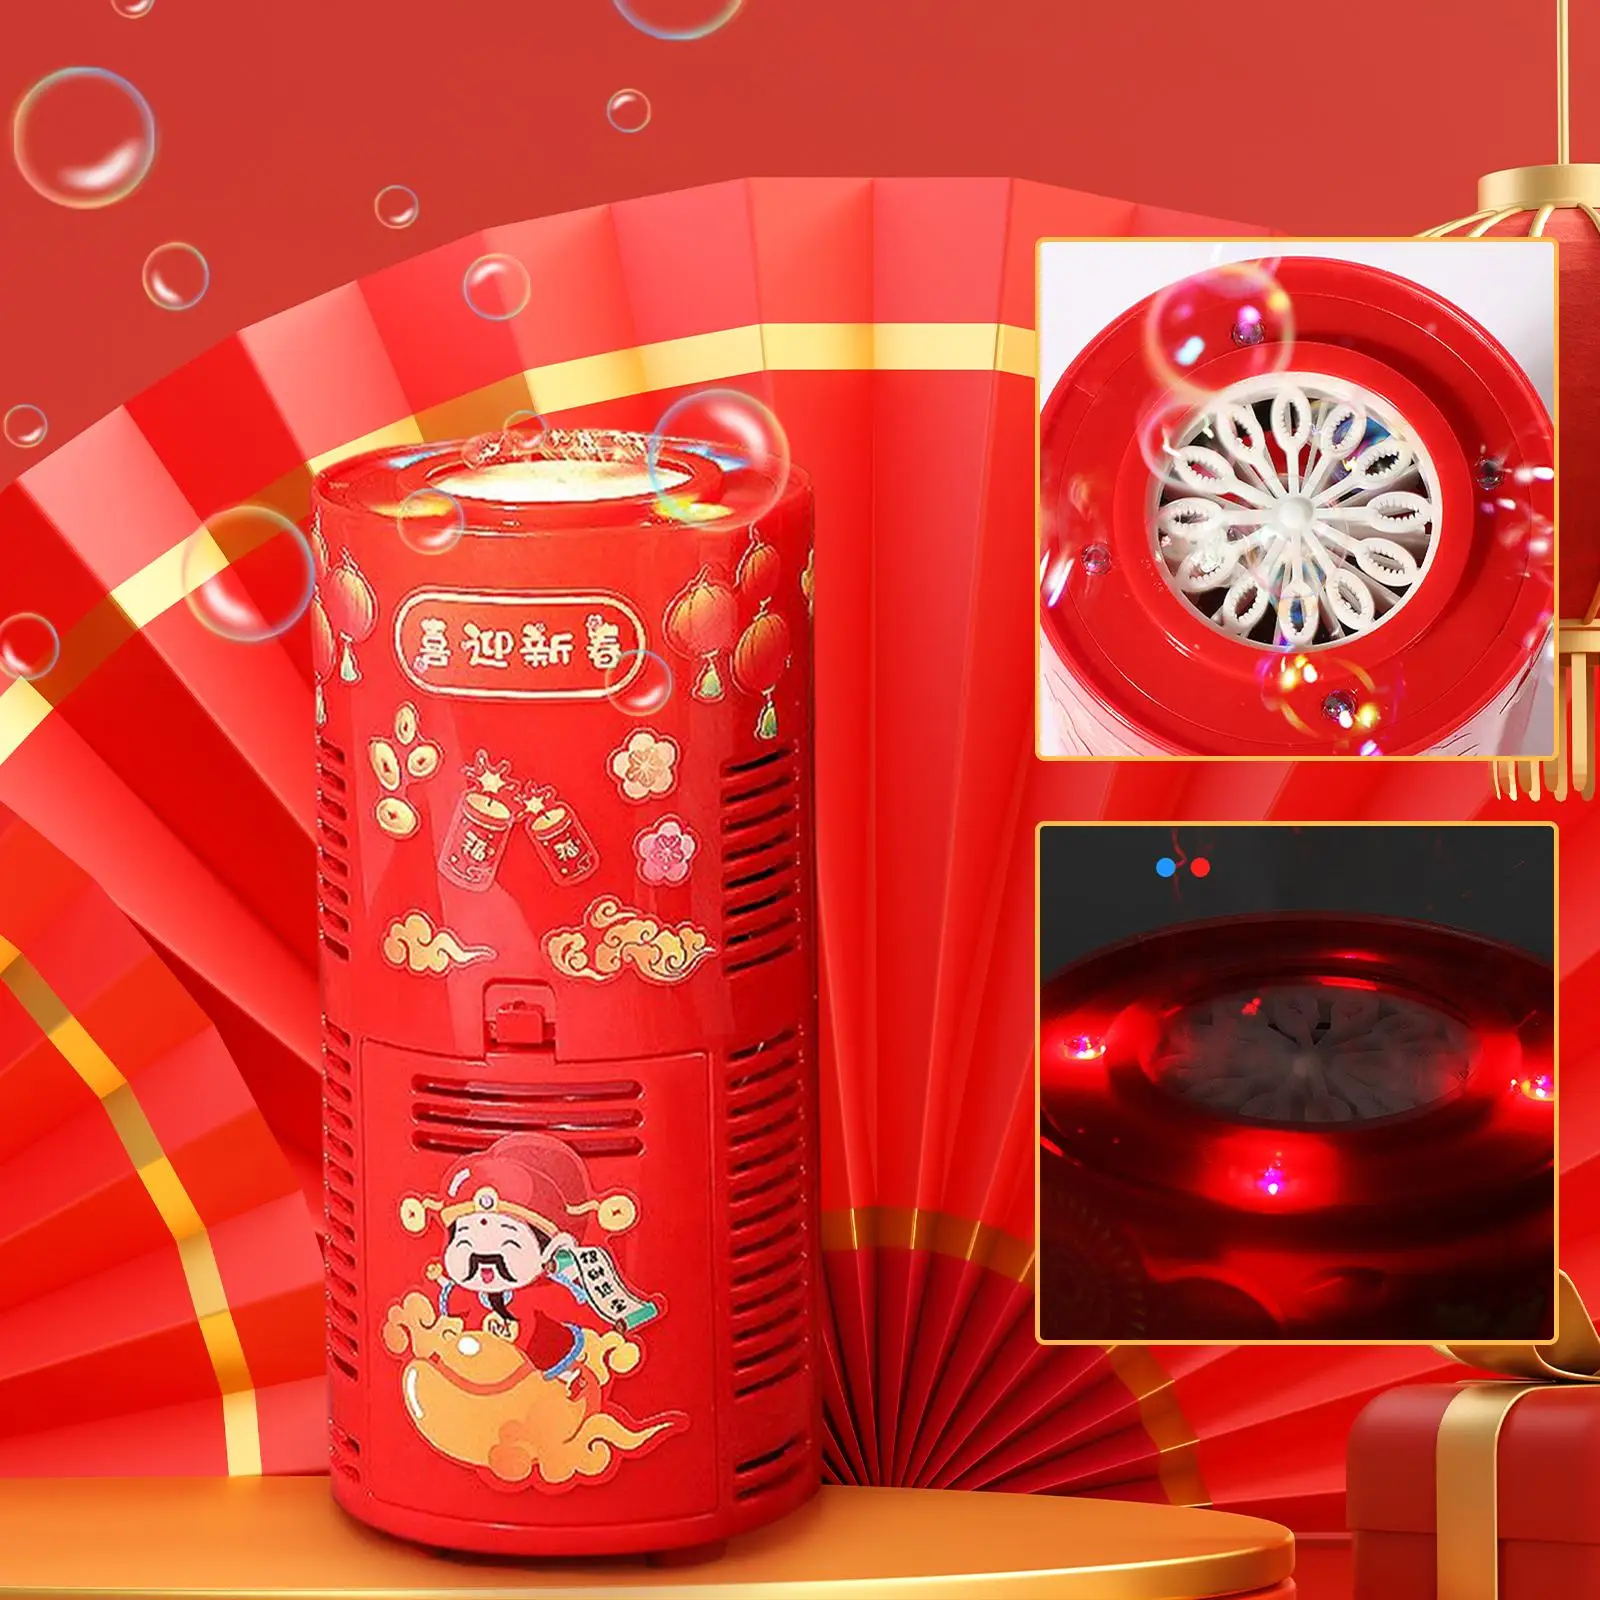 Automatic Bubbles Maker with Sounds Big Bubble Portable Battery Powered for New Year